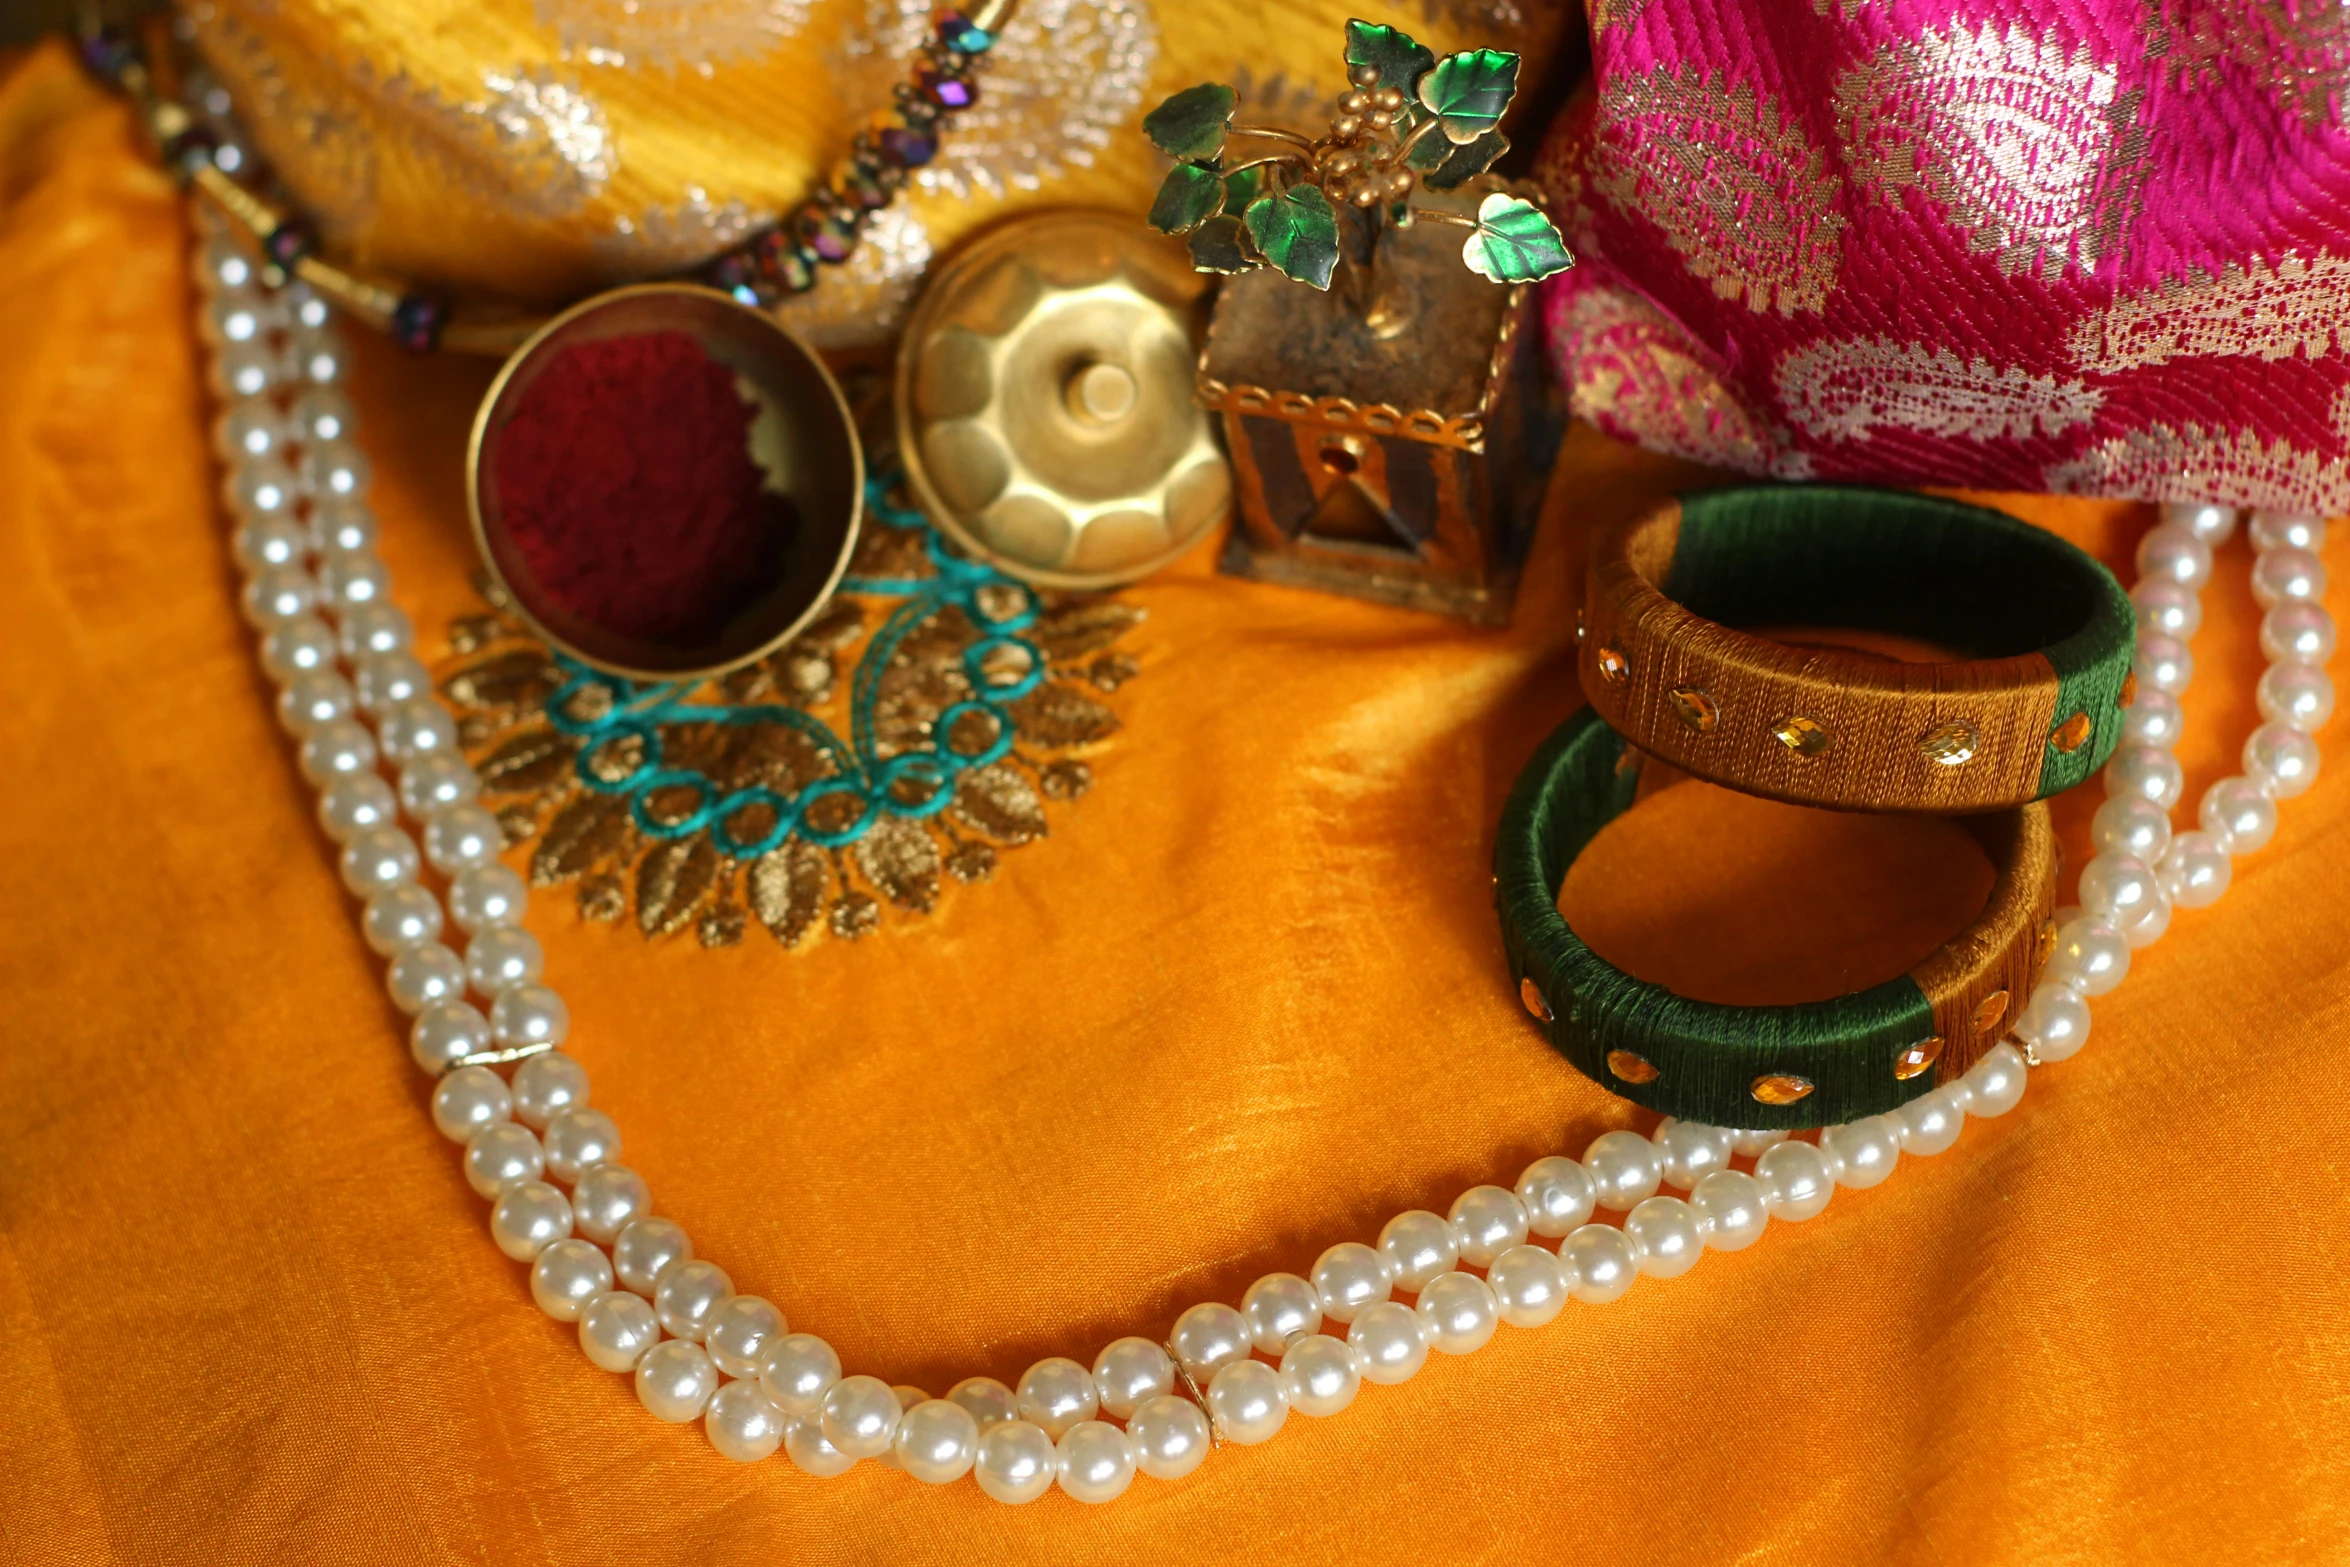 several necklaces and accessories laid out on an orange cloth